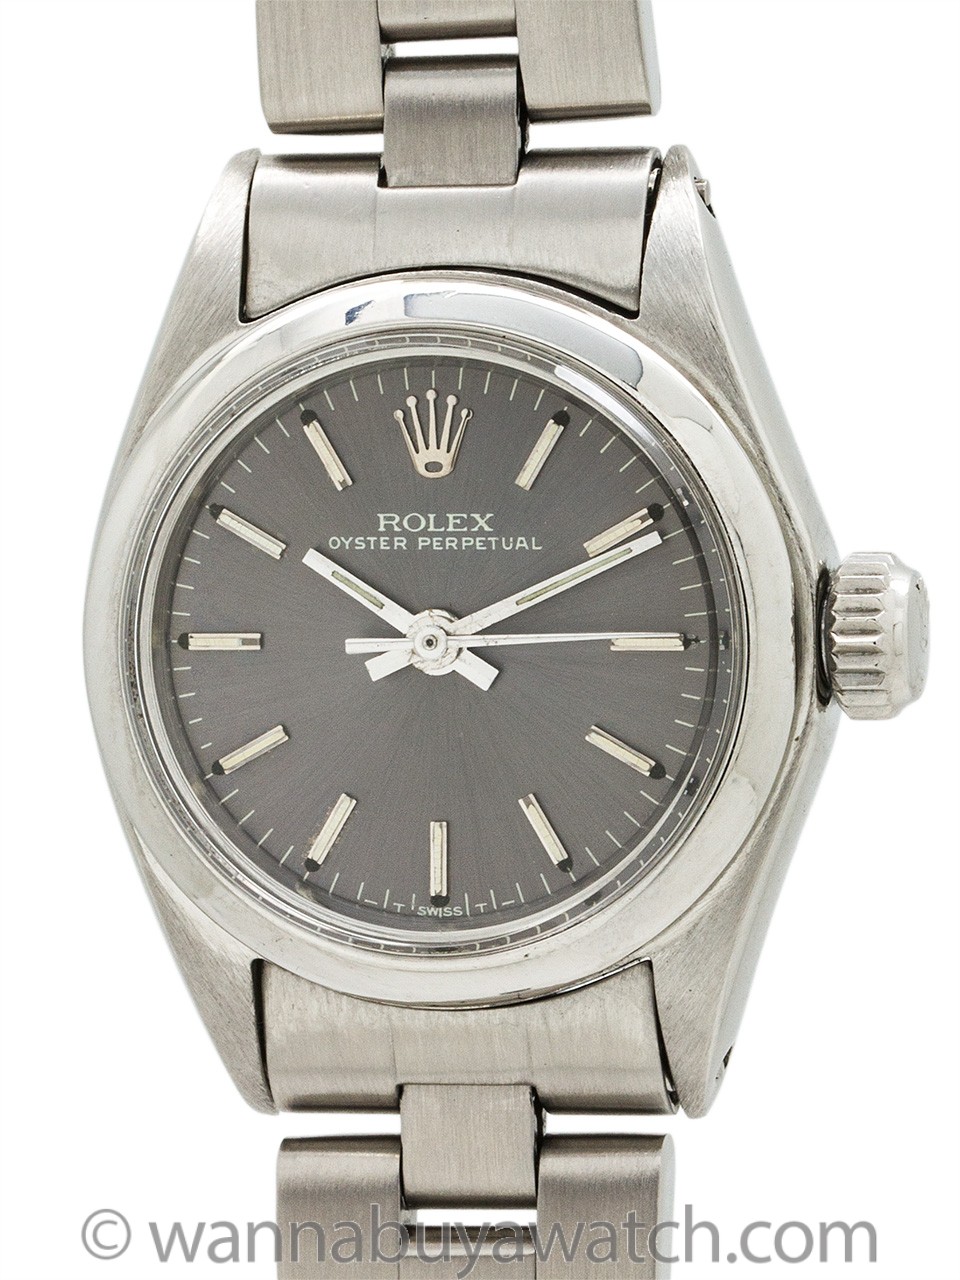 Lady Rolex Oyster Perpetual ref 6618 